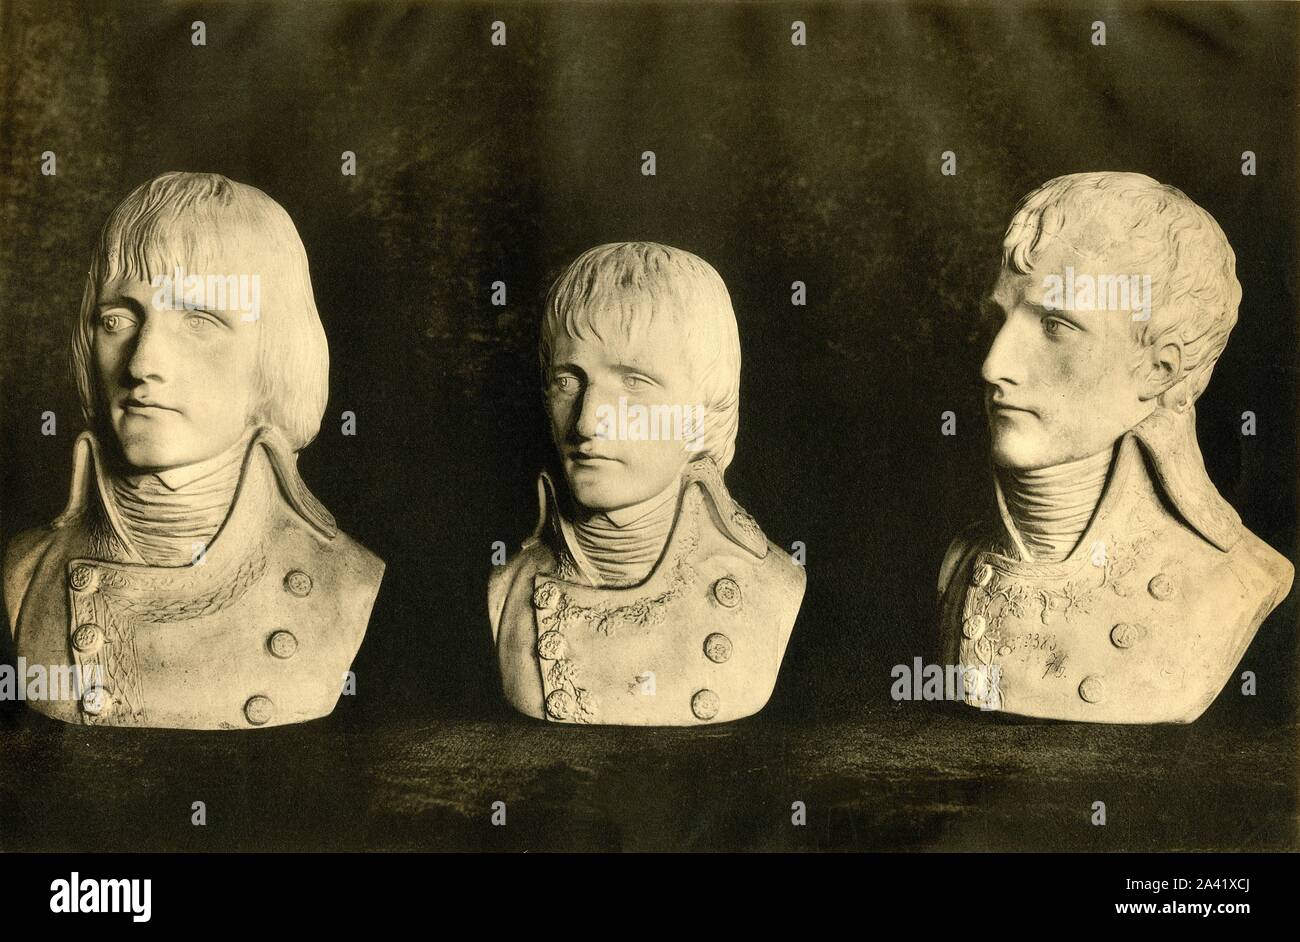 Busts of Napoleon, late 18th century, (1921). Plaster bust portraits of Napoleon Bonaparte (1769-1821). Left and centre: busts made by Louis-Simon Boizot, chief sculptor of the S&#xe8;vres factory, the first in 1798, and the second in 1799 after Napoleon's return from the Egyptian Campaign; right: bust by an unknown artist, possibly Cartellier. All made at S&#xe8;vres in France. From &quot;Napoleon&quot;, by Raymond Guyot. [H. Floury, Paris, 1921] Stock Photo